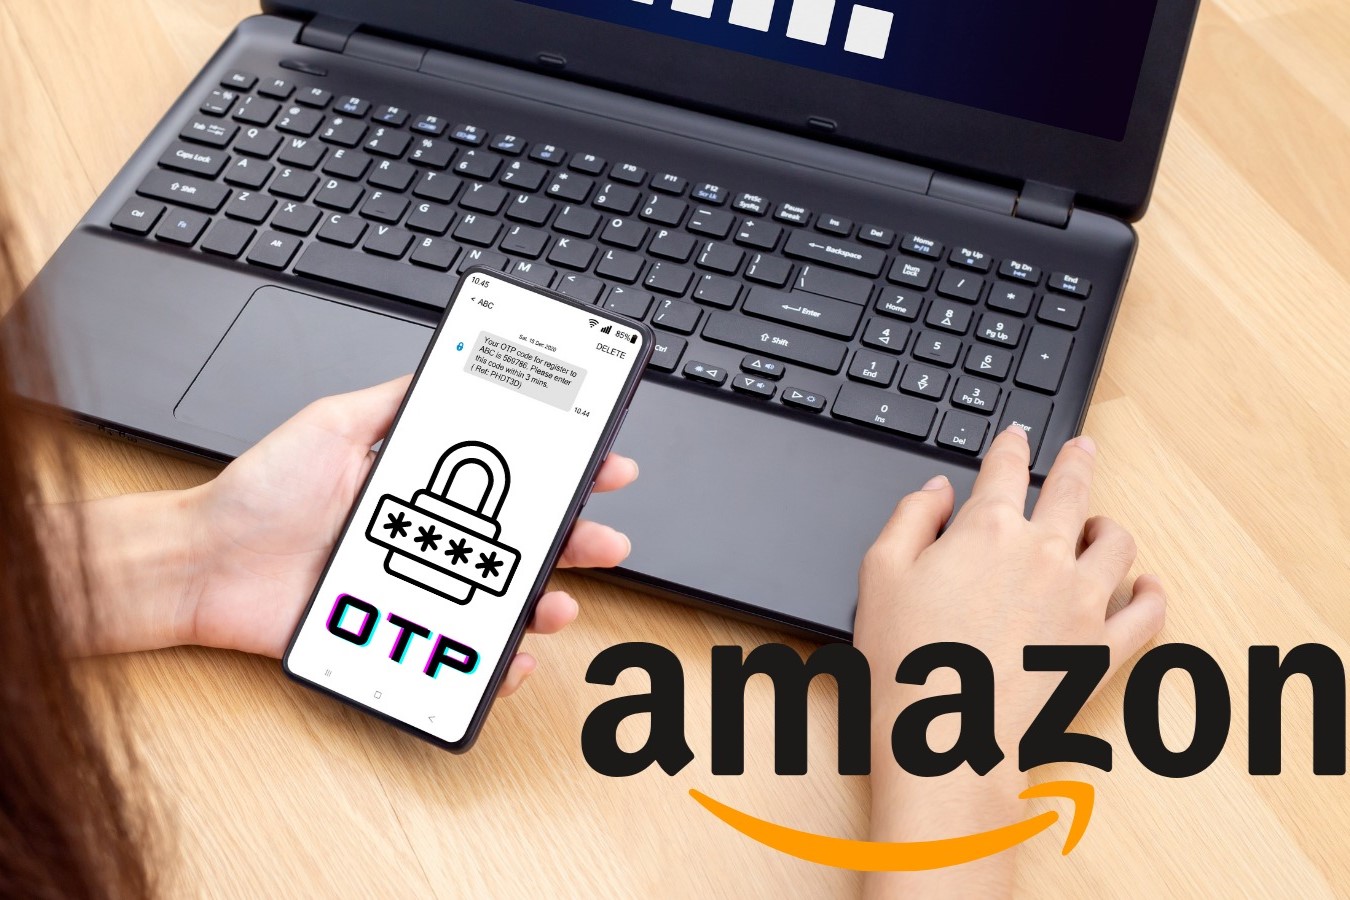 Amazon’s Mysterious OTP Messages: What’s Really Going On?